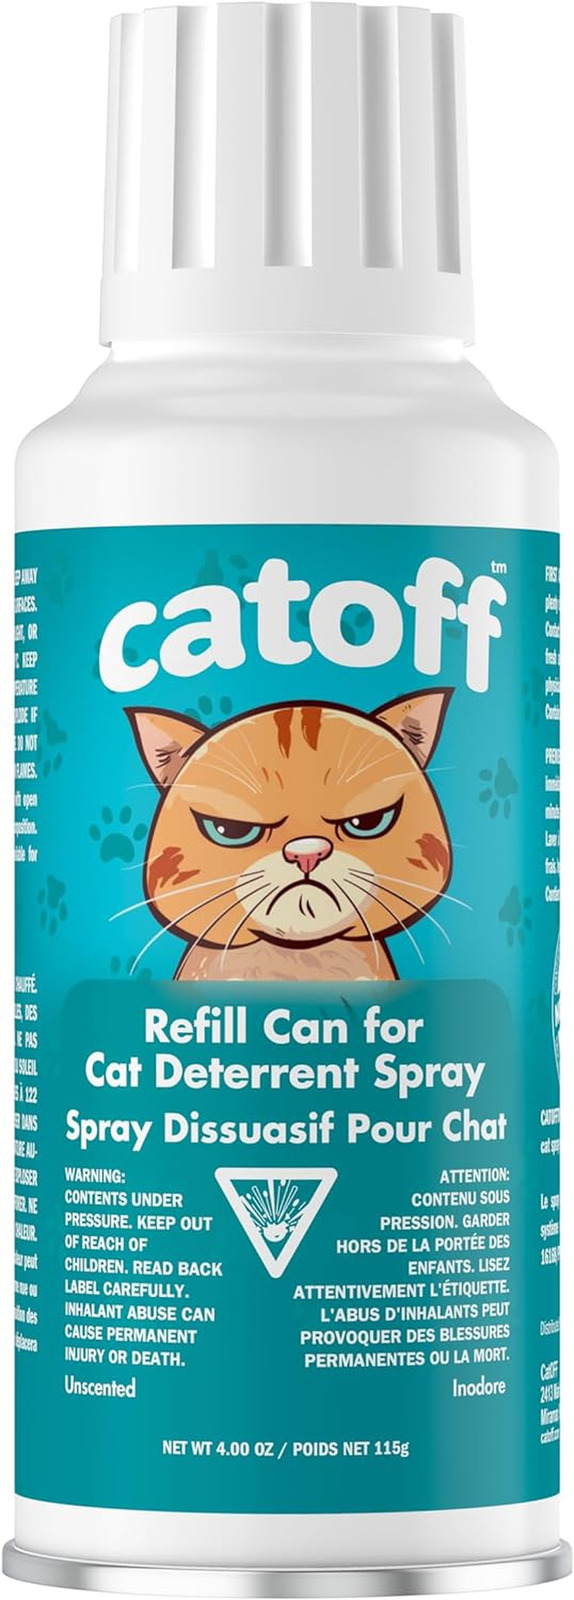 Catoff Refill Compatible with SSSCAT Indoor Cat Deterrent Spray System, Made in 